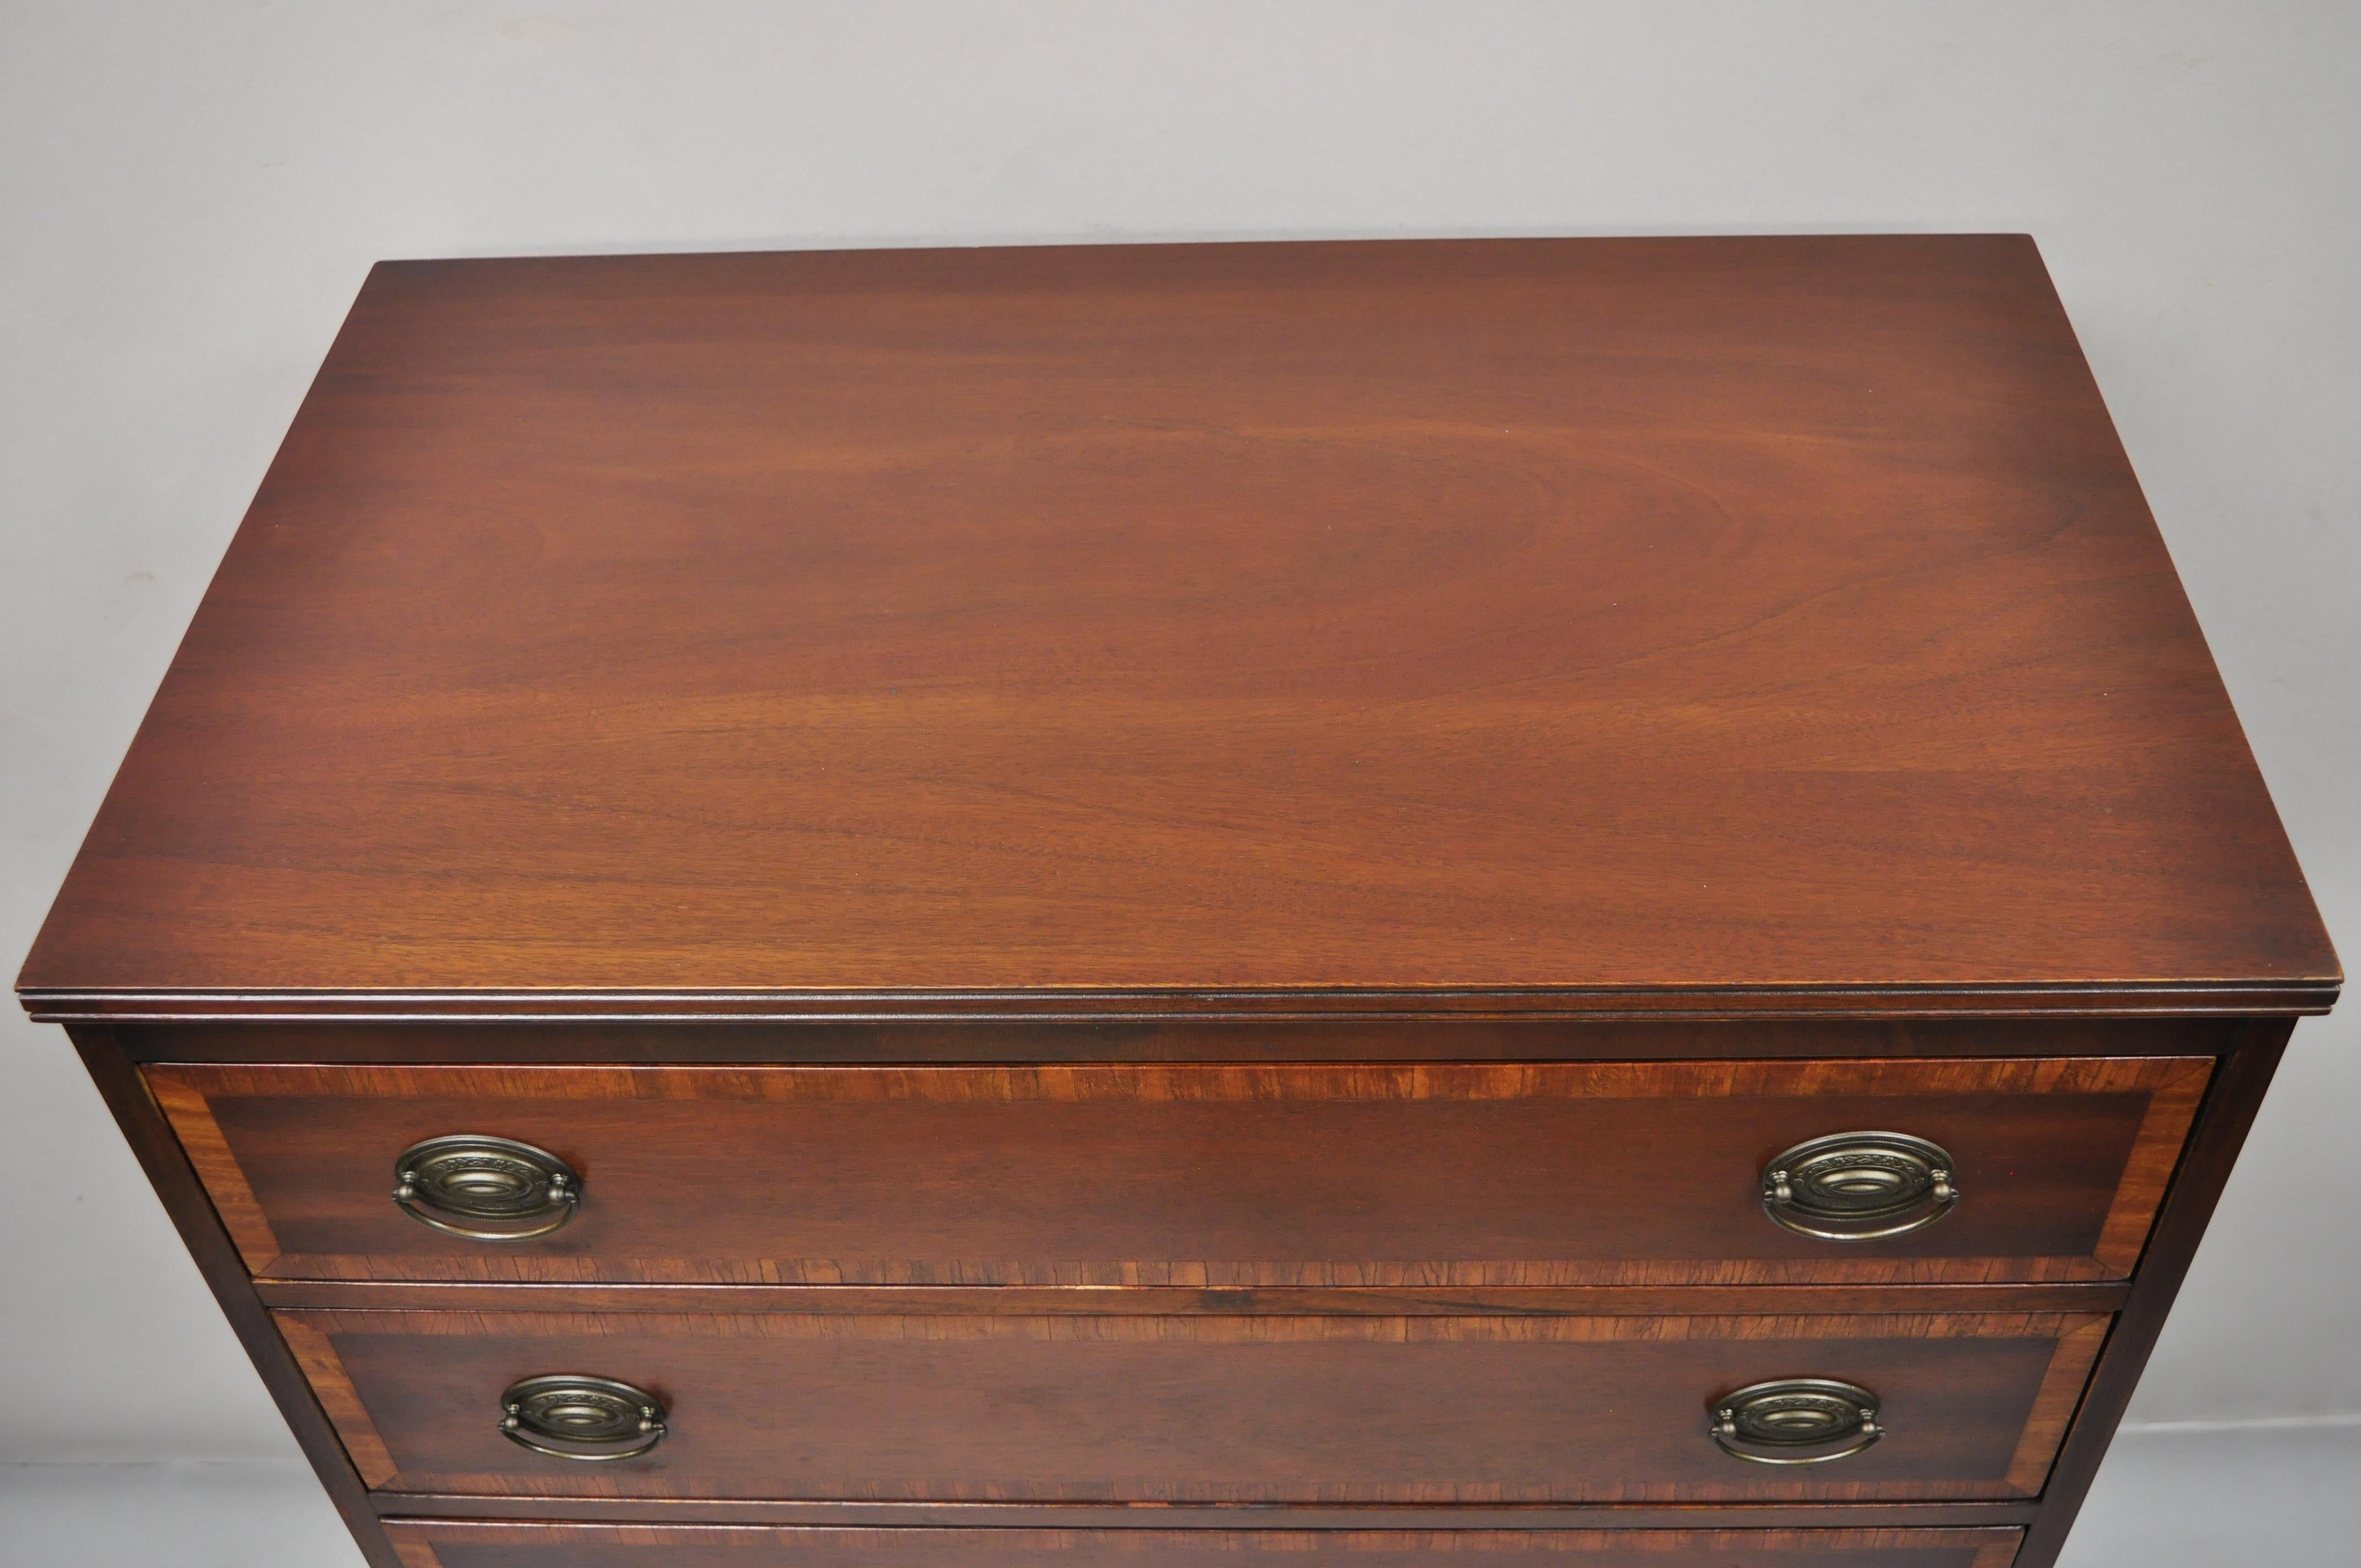 Sheraton Vintage Mahogany 5 Drawer Banded Inlay Tall Chest Dresser Highboy by Stiehl